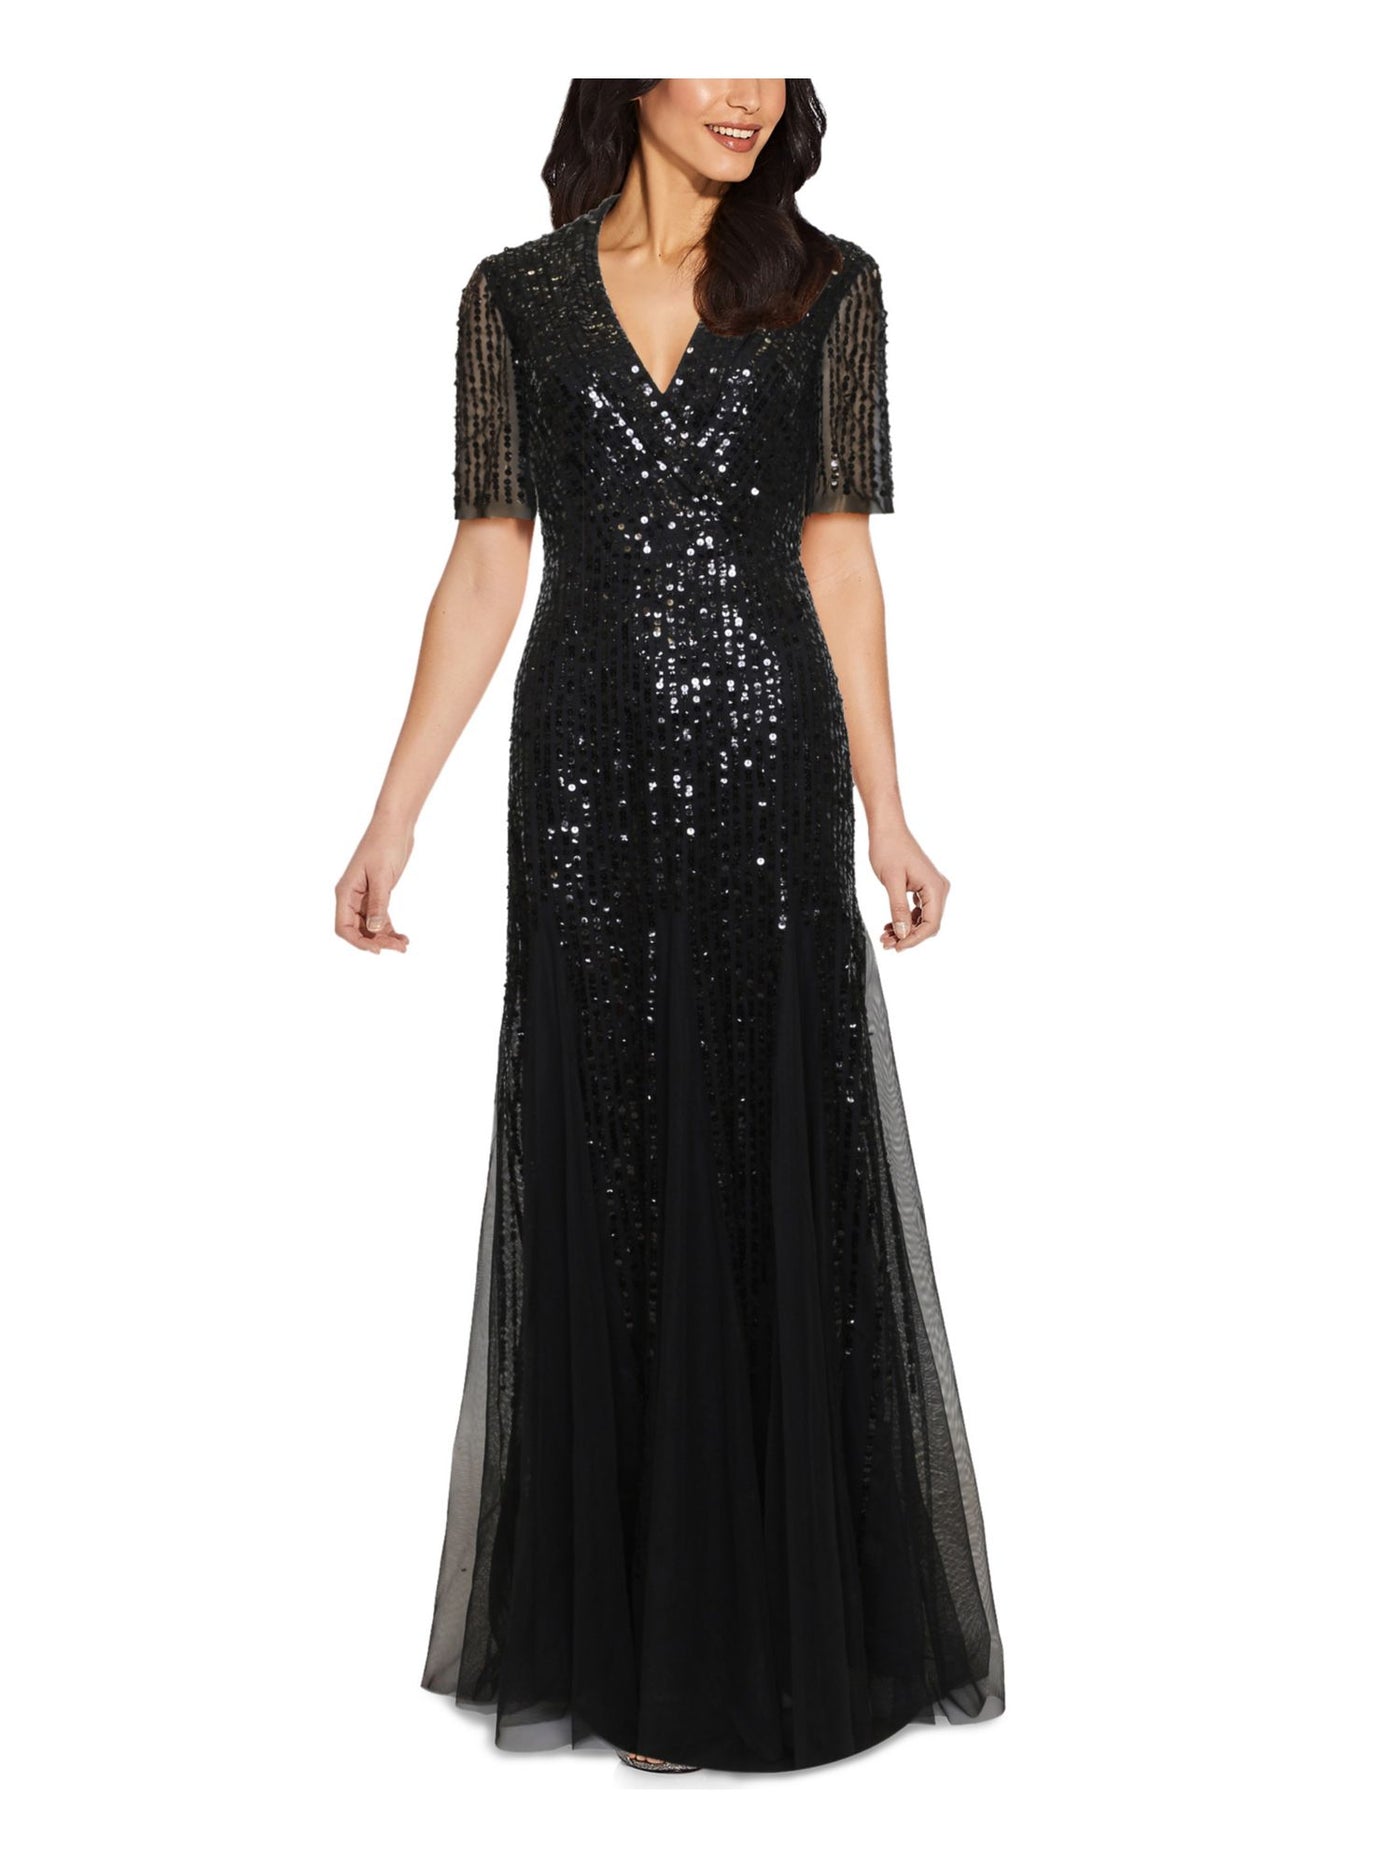 ADRIANNA PAPELL Womens Black Sequined Fitted Tuxedo Style Illusion Godets Short Sleeve V Neck Full-Length Formal Gown Dress 4